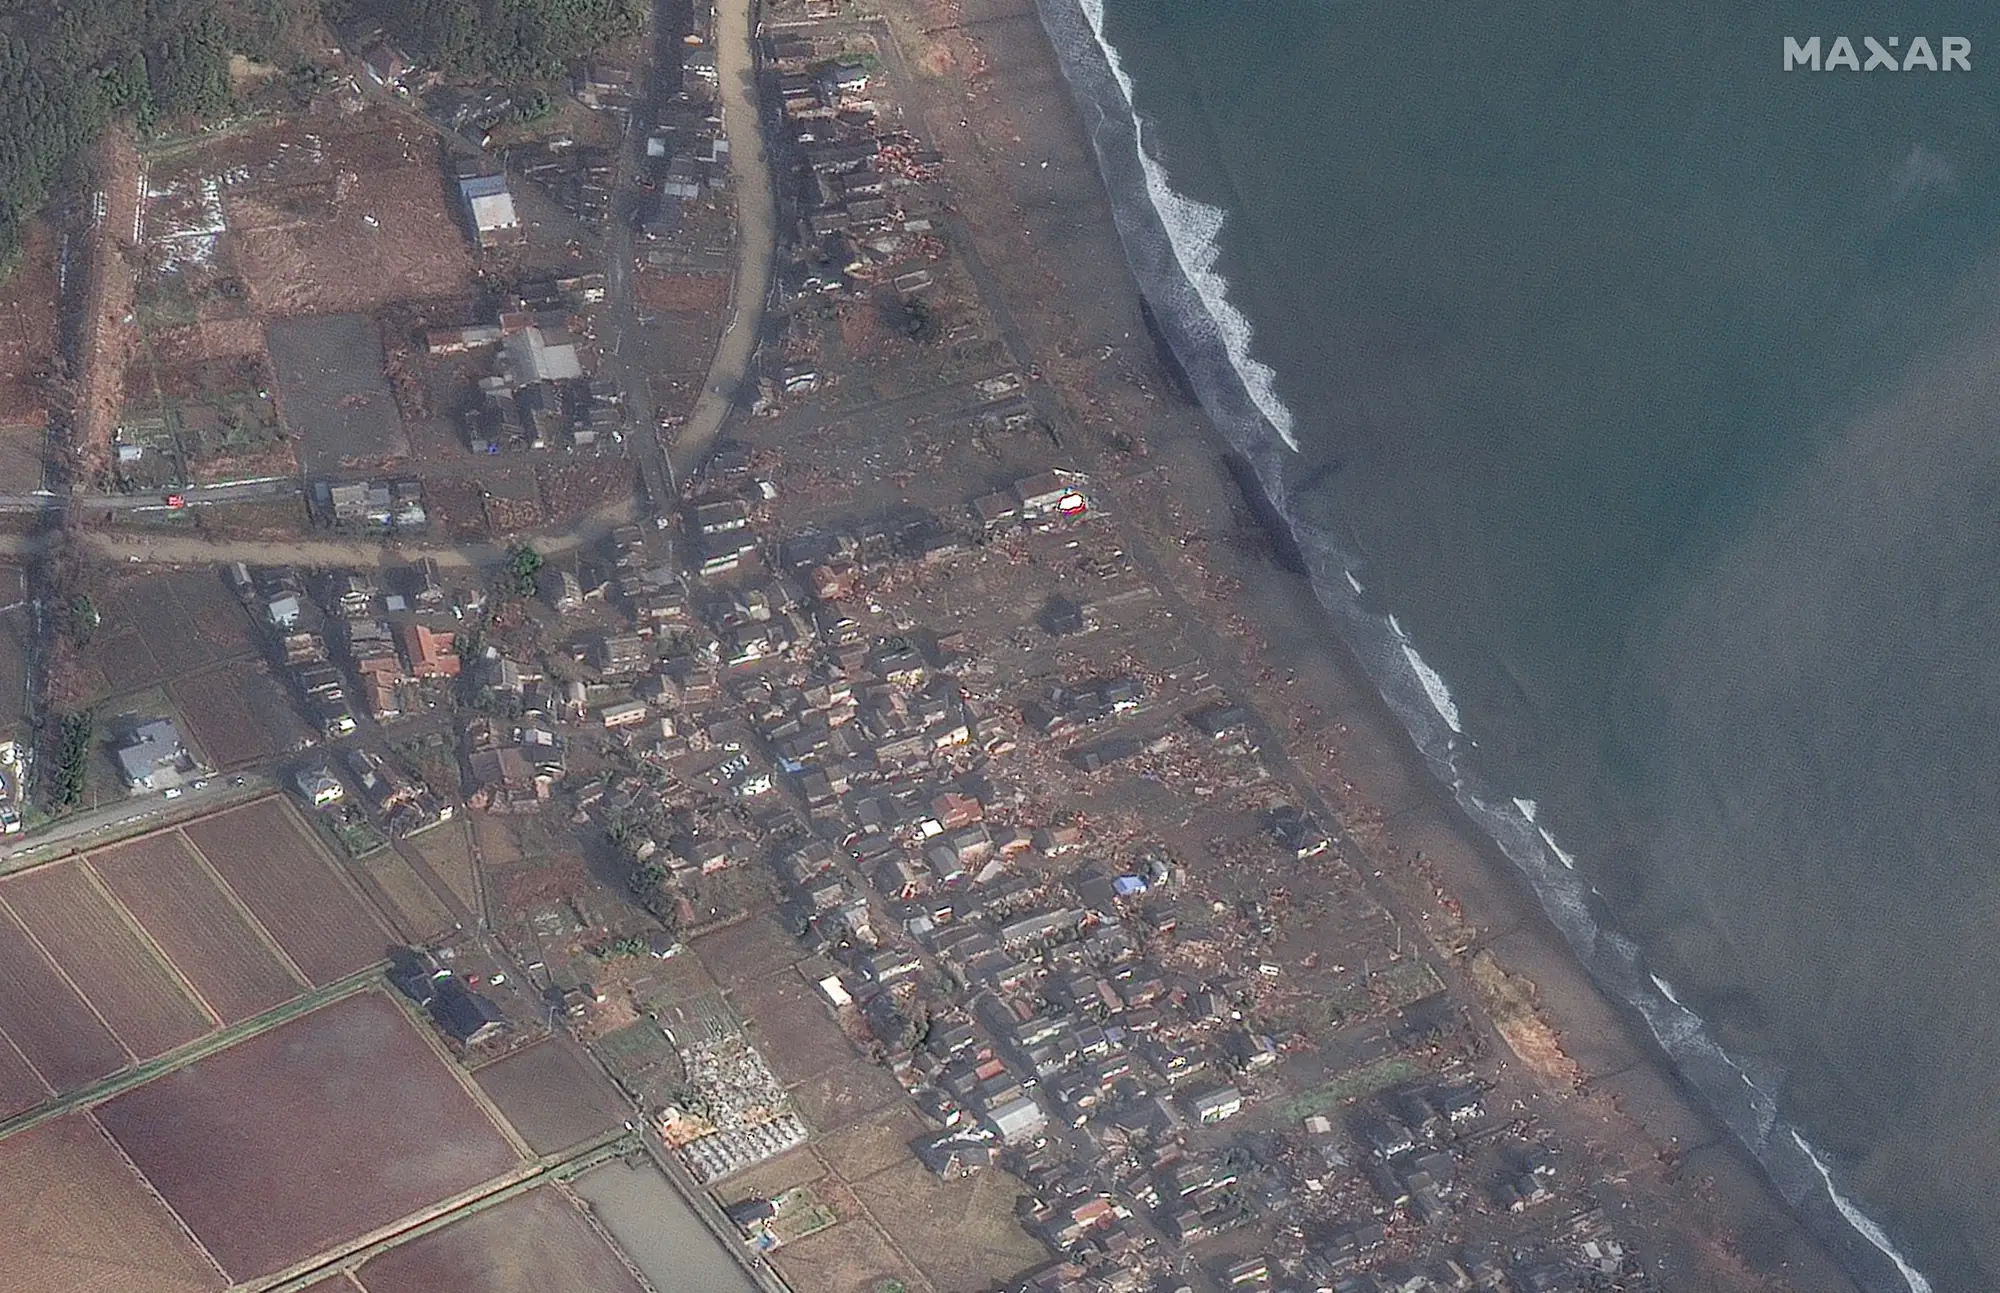 Coastline near Ukai Japan after a powerful earthquake. Dozens of destroyed homes along the coast are shown.